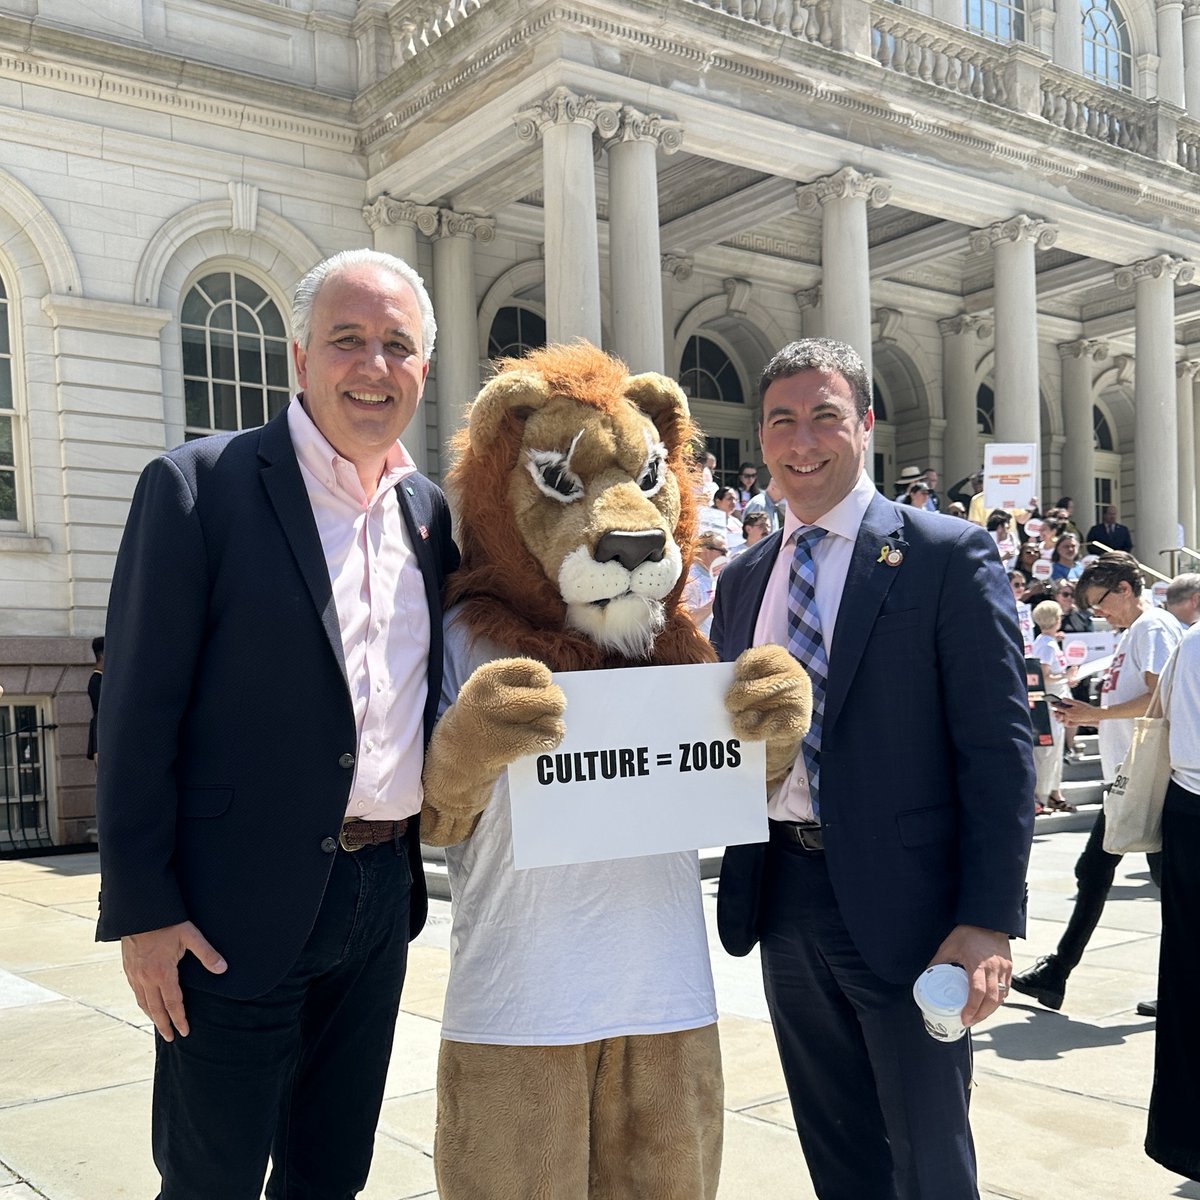 Thank you @A_StevensD16 and @EricDinowitzNYC for standing up for culture like our own @BronxZoo in their home borough. ACT NOW: Call on @NYCMayor and @NYCCouncil to restore $53M for culture: bit.ly/44PCagw #Culture4All #NoCutsToCulture